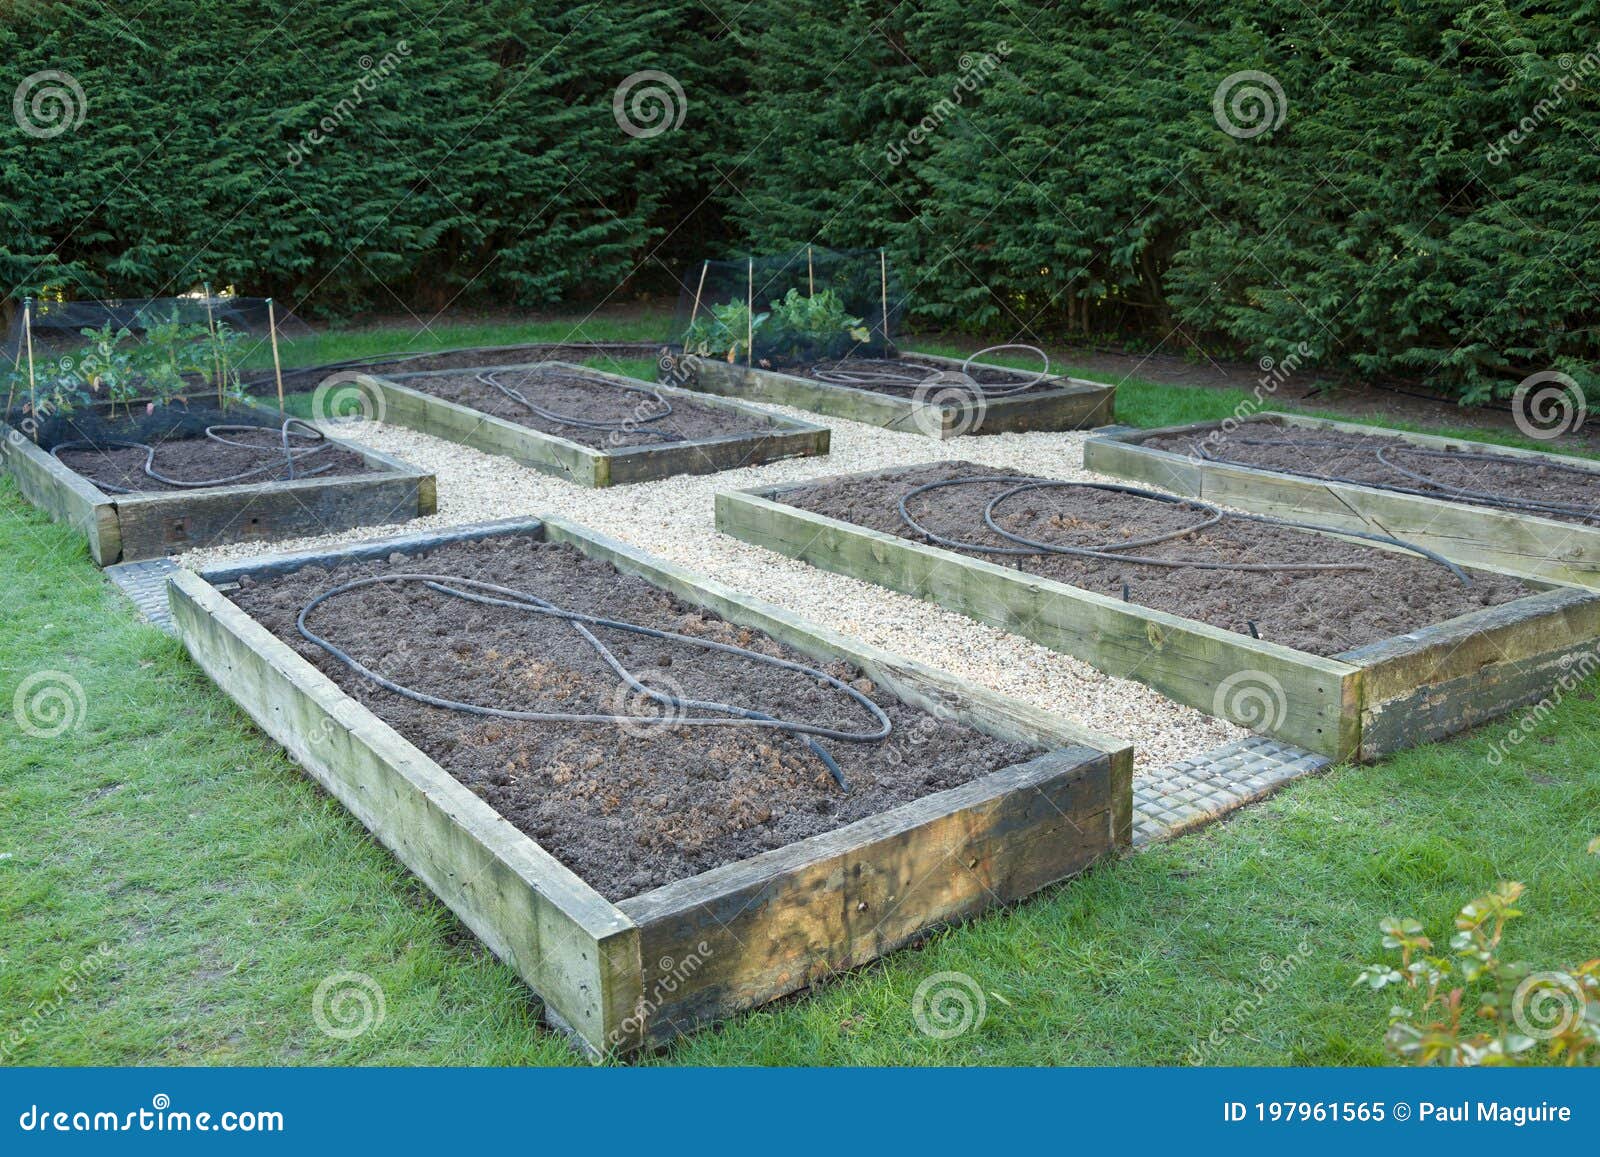 Winter Garden Maintenance Empty Vegetable Patch Uk Stock Image Image Of Horticulture Fertilizer  - What To Do With Raised Garden Beds In Winter